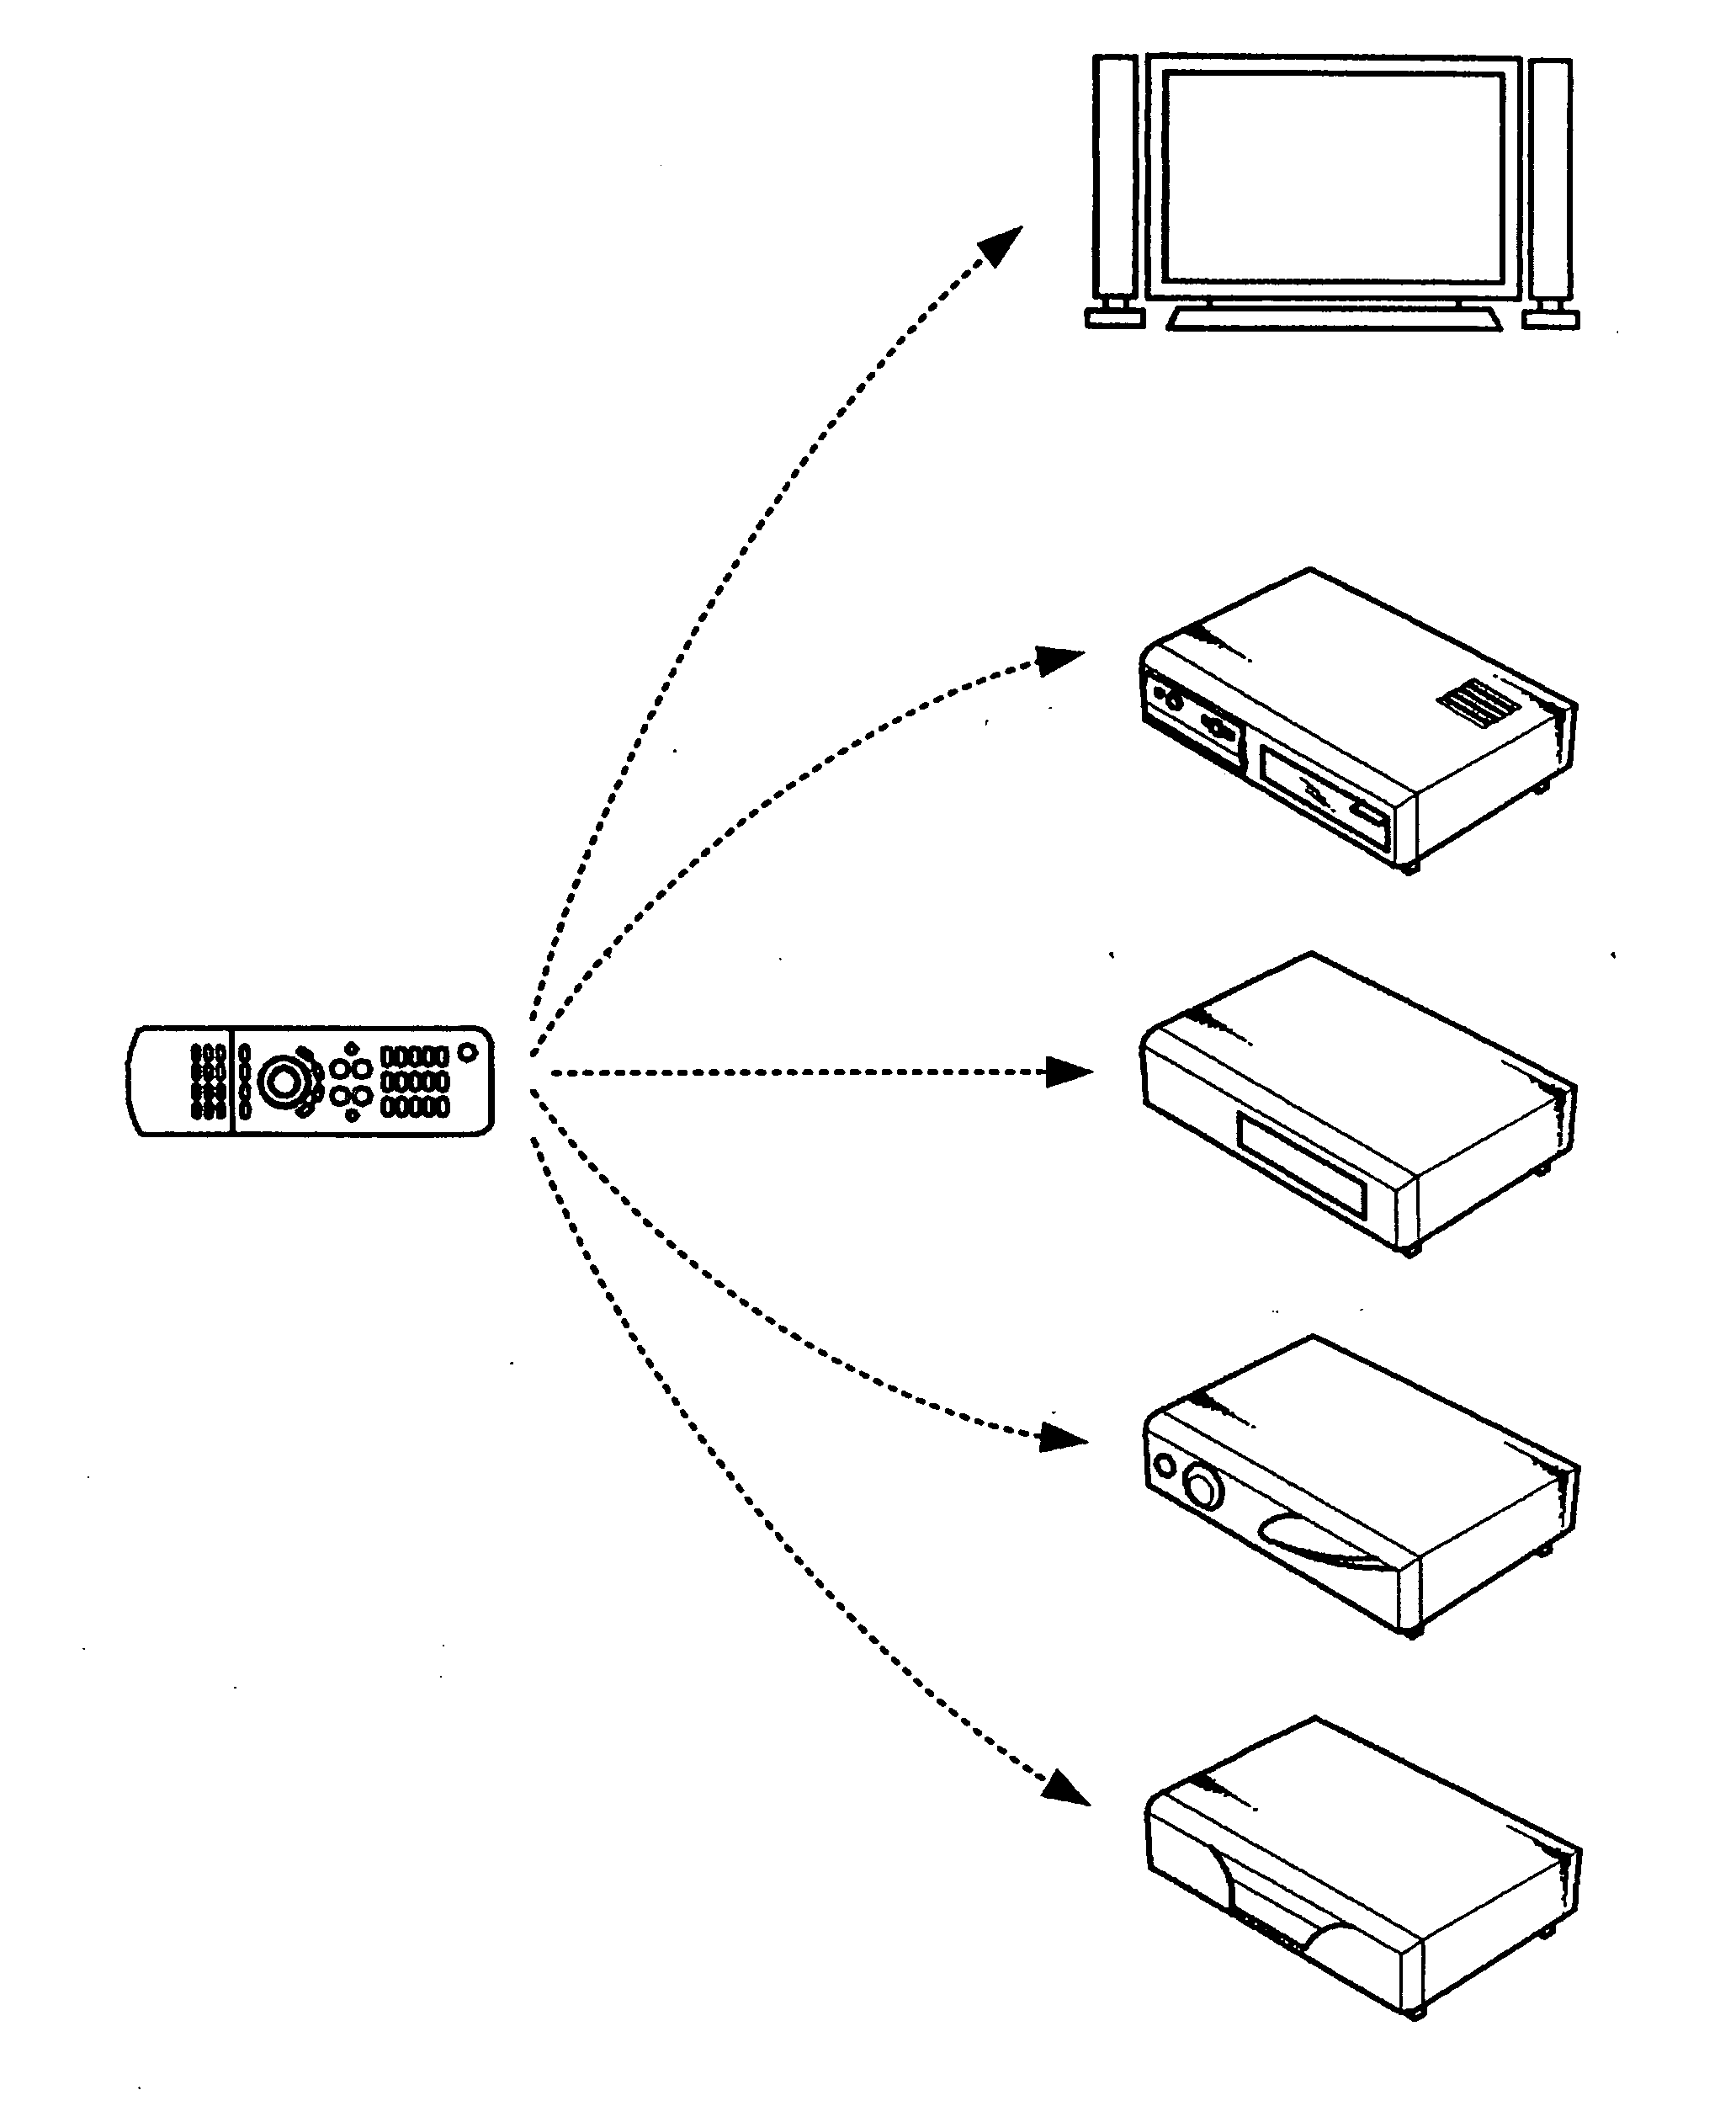 A/V system available for integrated control and method of controlling the same